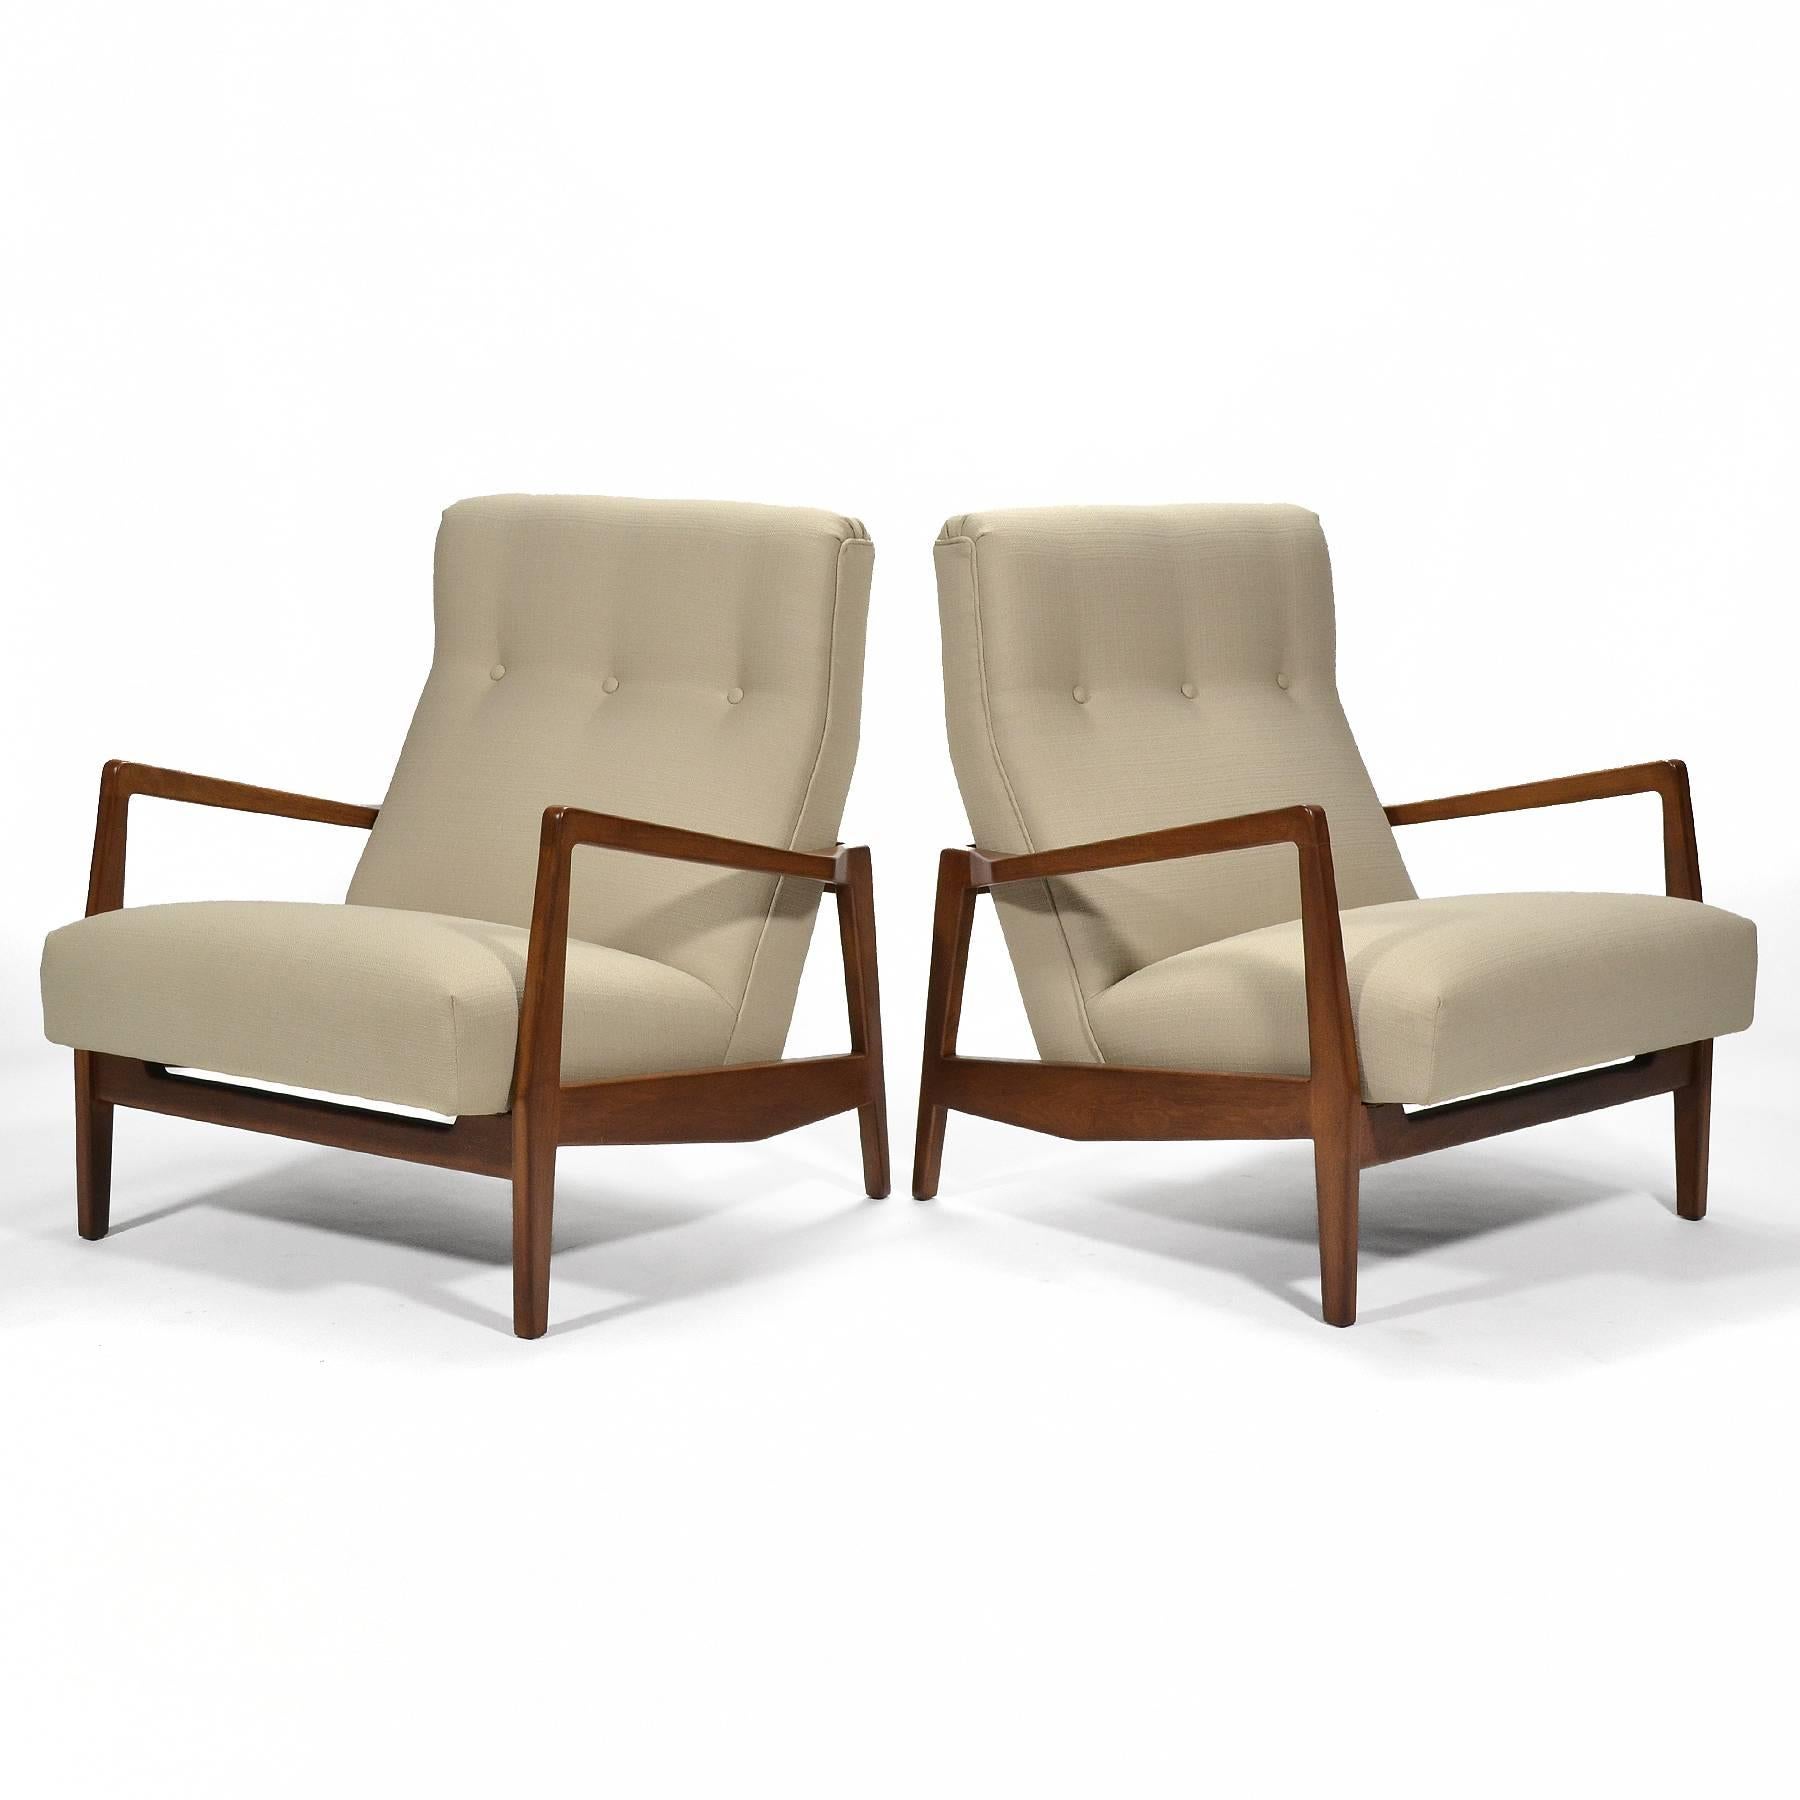 Mid-Century Modern Jens Risom Pair of Lounge Chairs